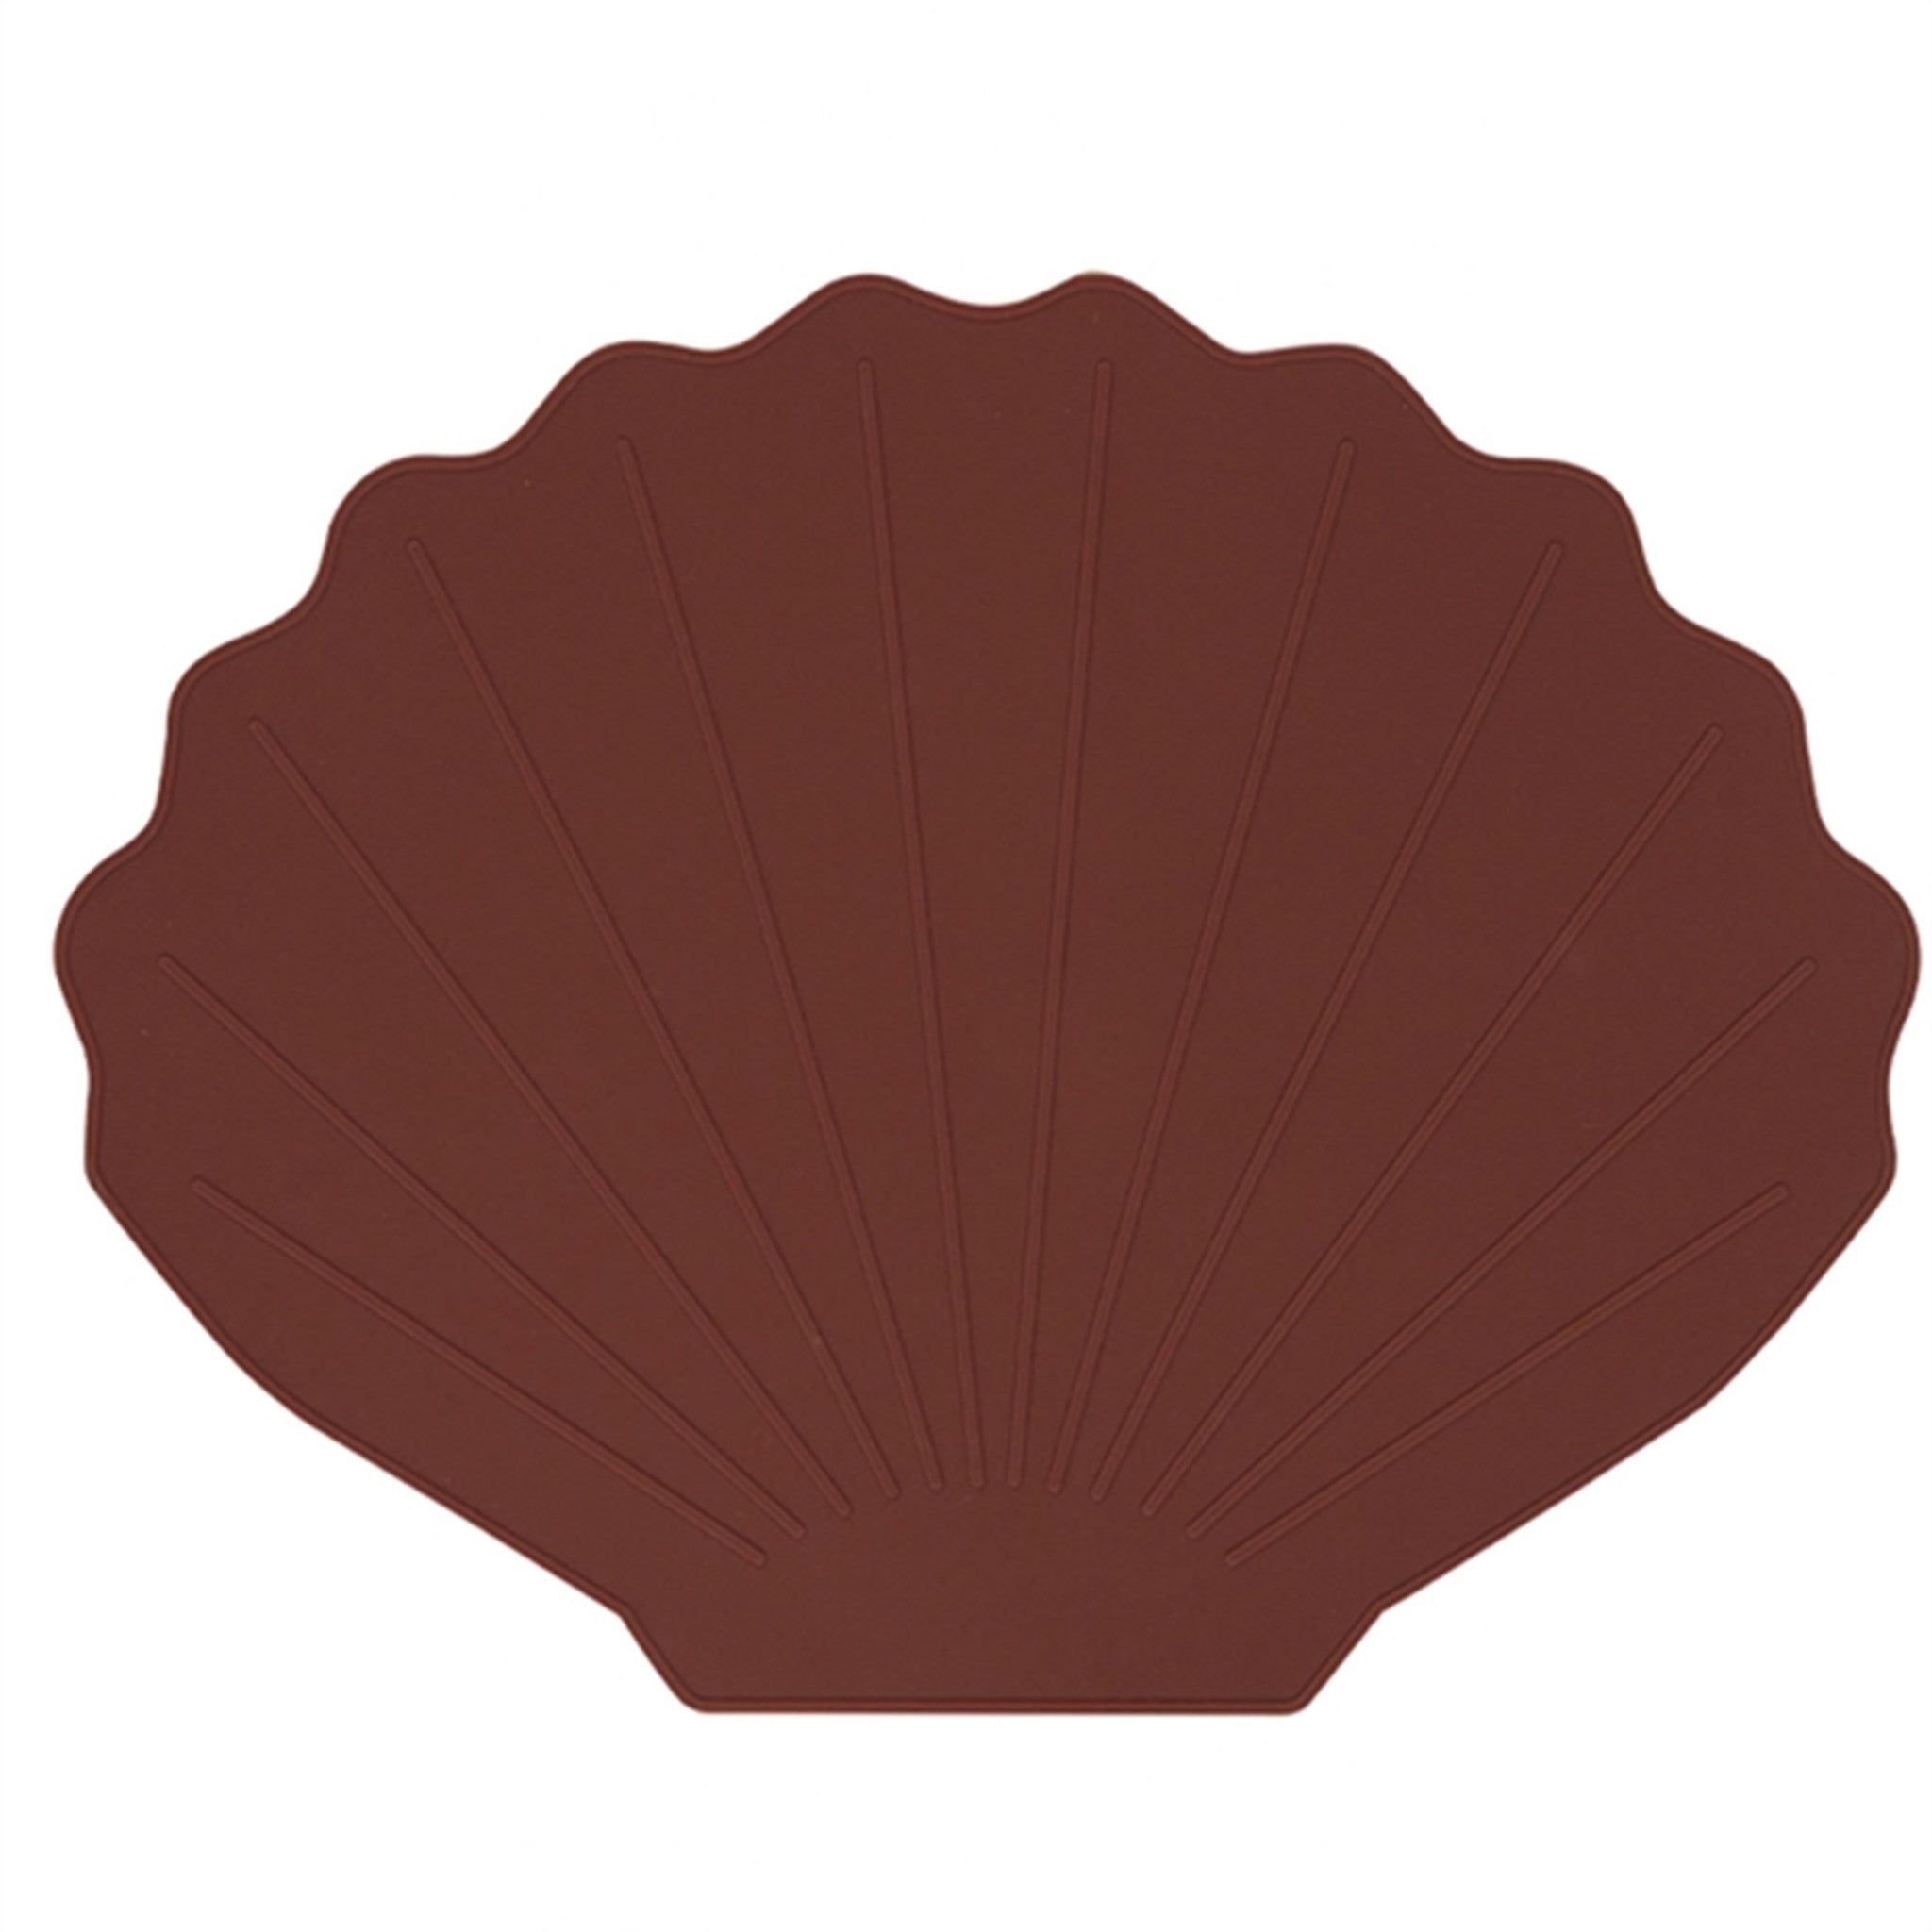 OYOY Placemat Scallop Nutmeg